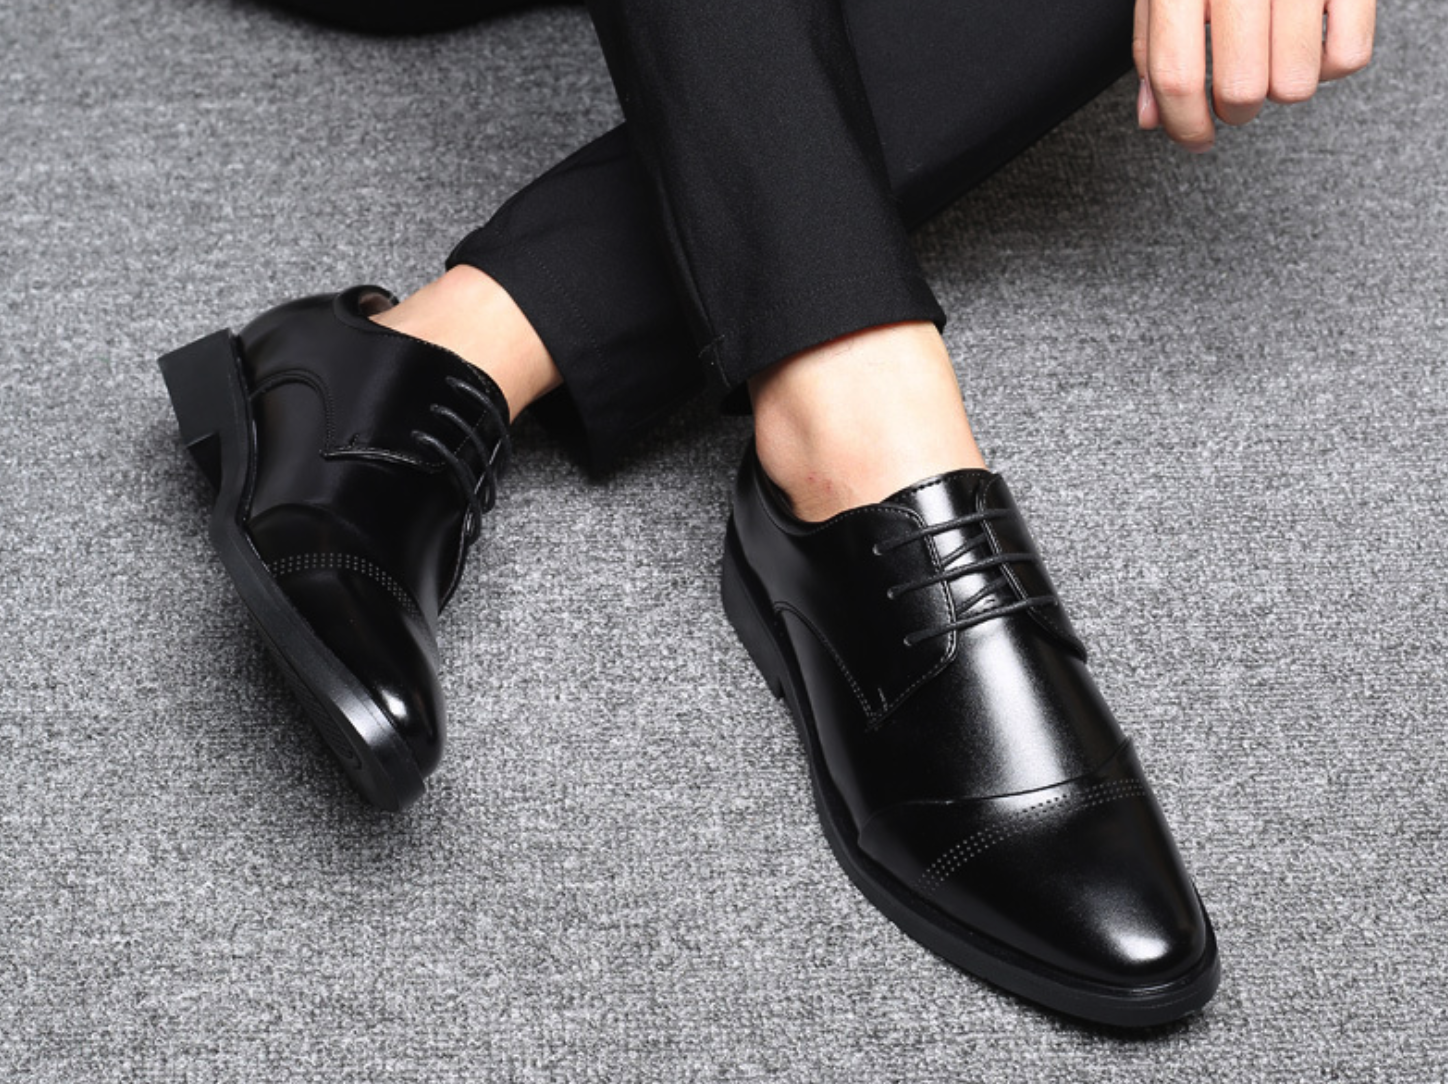 ShowMyHot High Quality Men Casual Oxfords Shoes Men Leather Dress Shoes Business Formal Wedding Party Shoes Men Flats 38 to 48